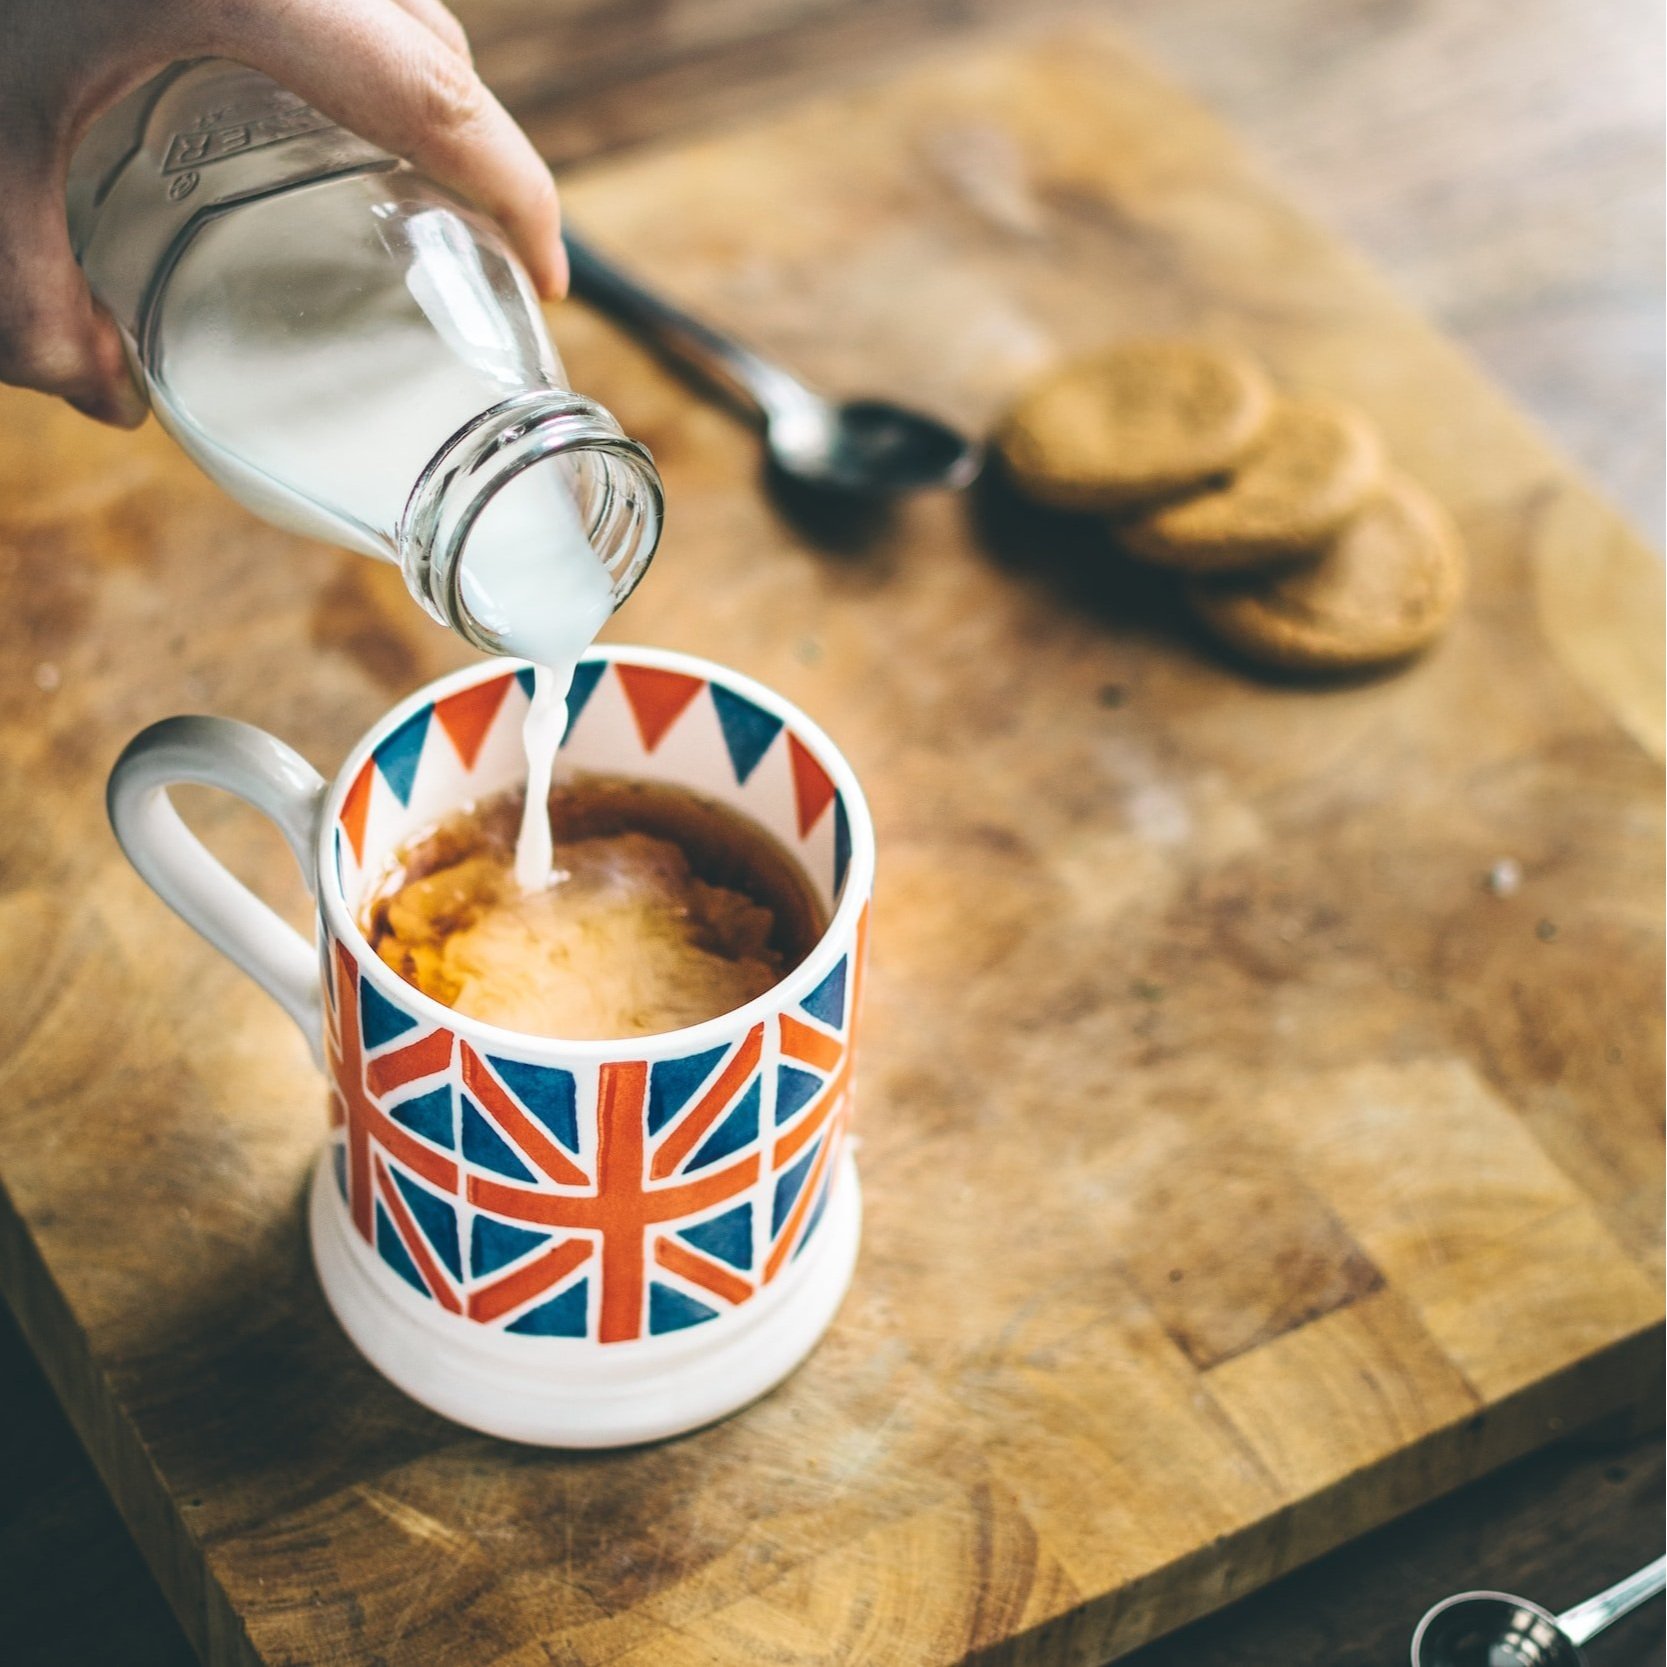 Why Is Tea Such A Big Deal In England?